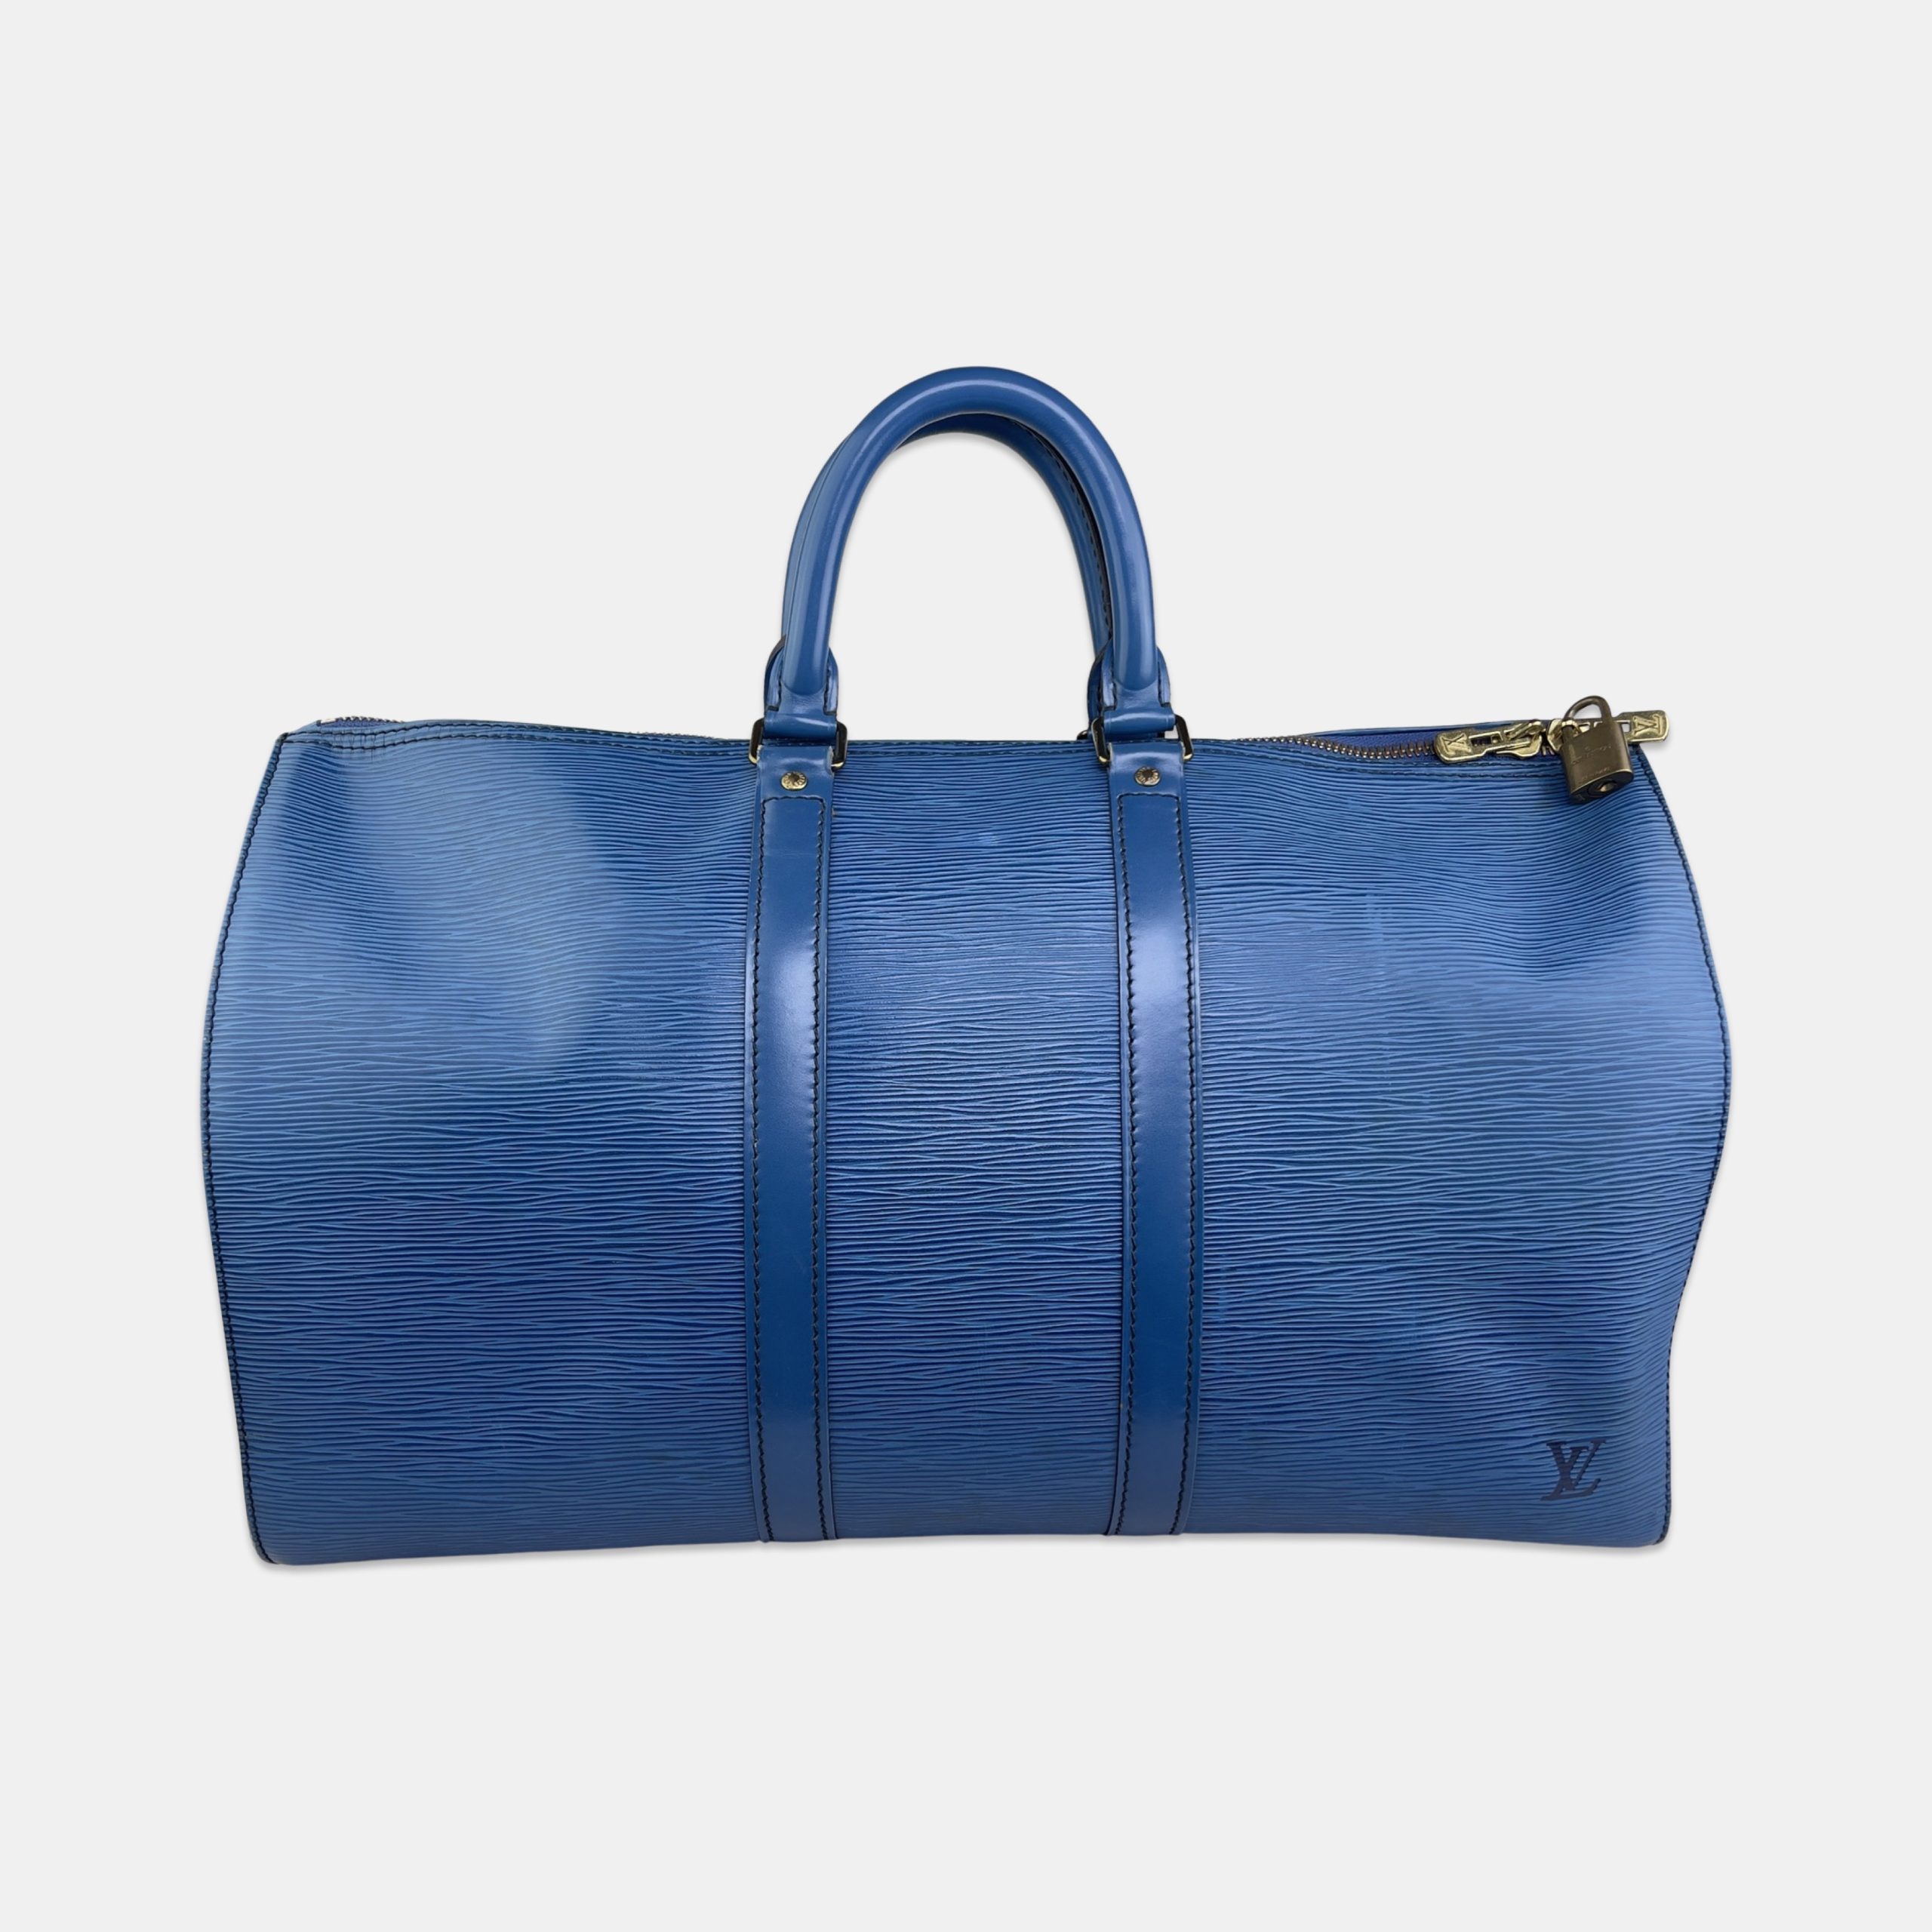 Louis Vuitton Stockholm - Leather Goods And Travel Items (Retail